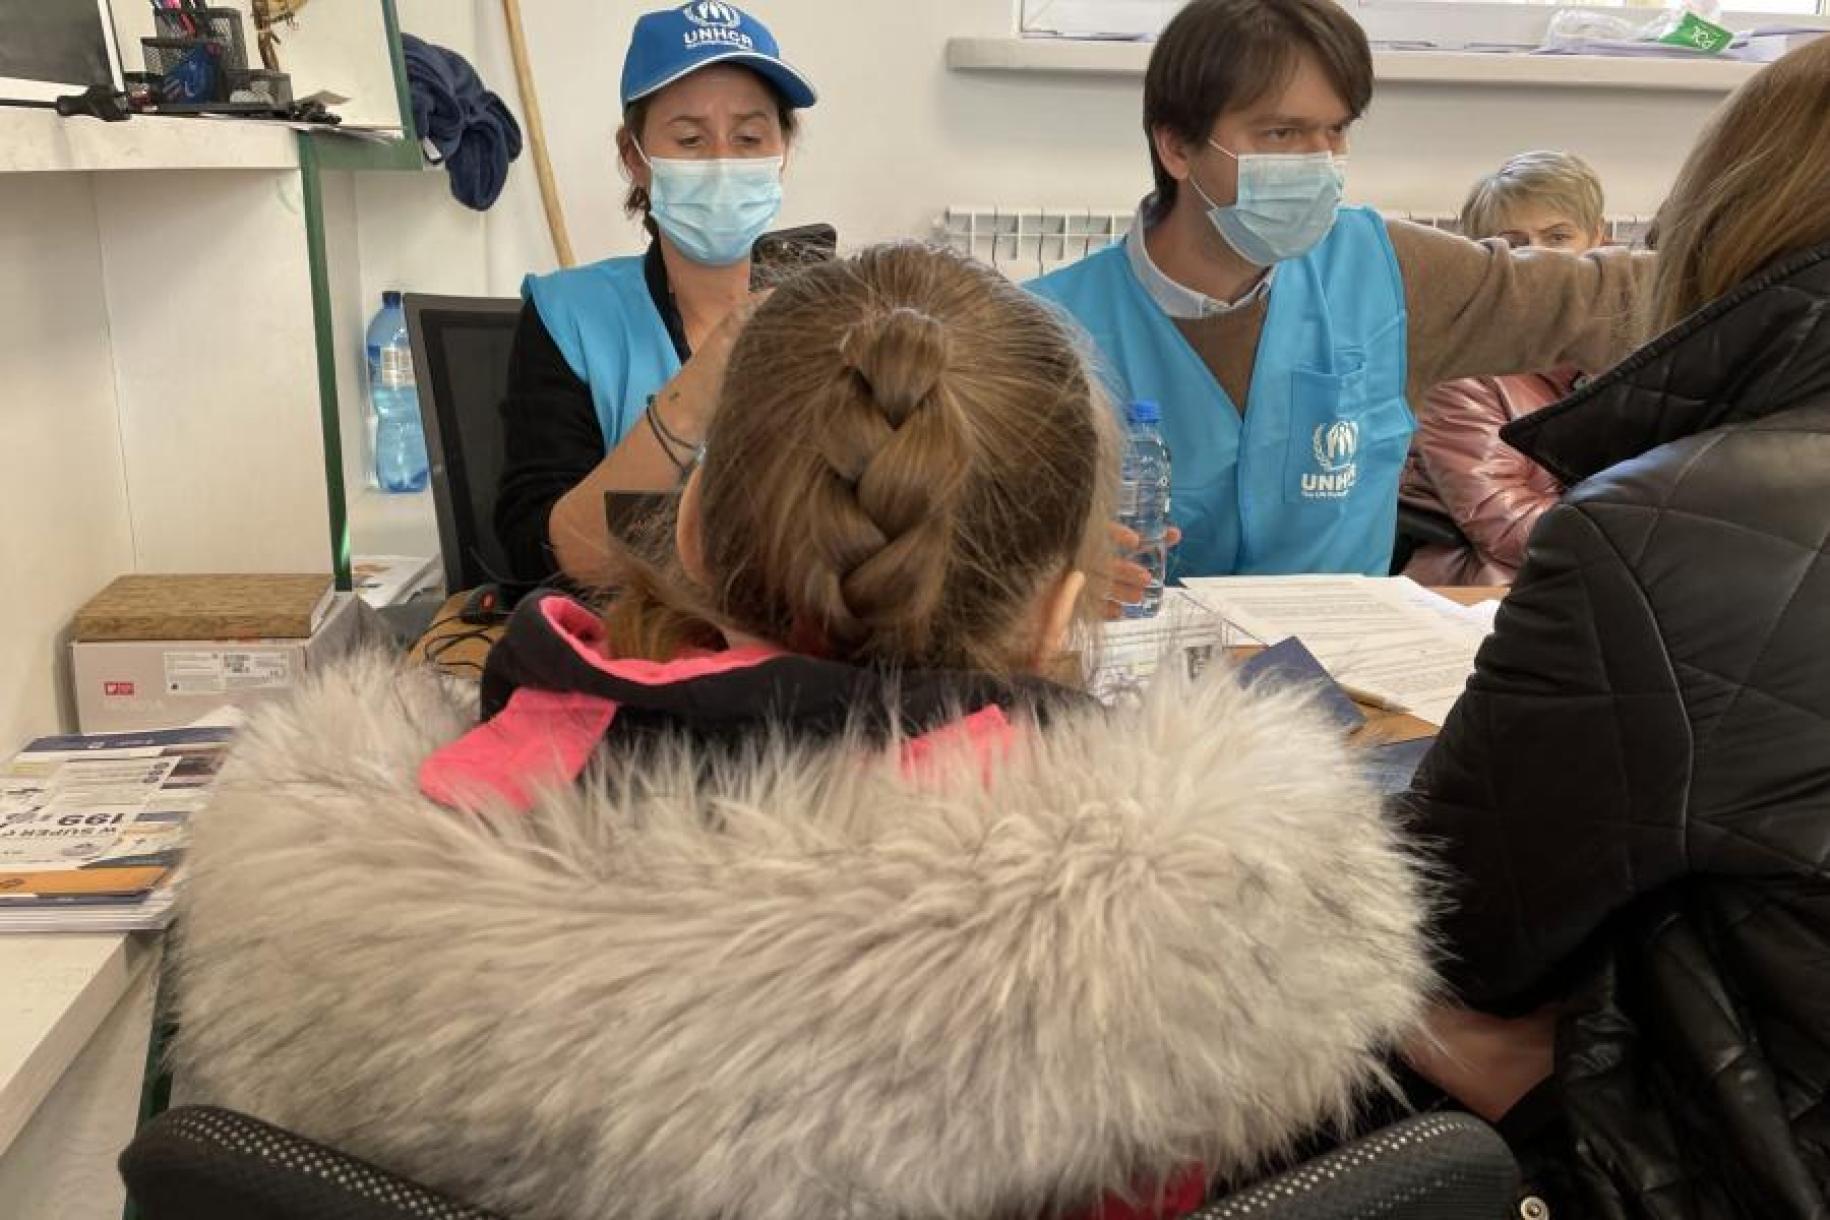 In an indoor area, two people in blue vests and wearing facemasks are having a conversation with an adult and a girl facing away from the camera and wearing warm clothes, and there is another person sitting in the back of the room.